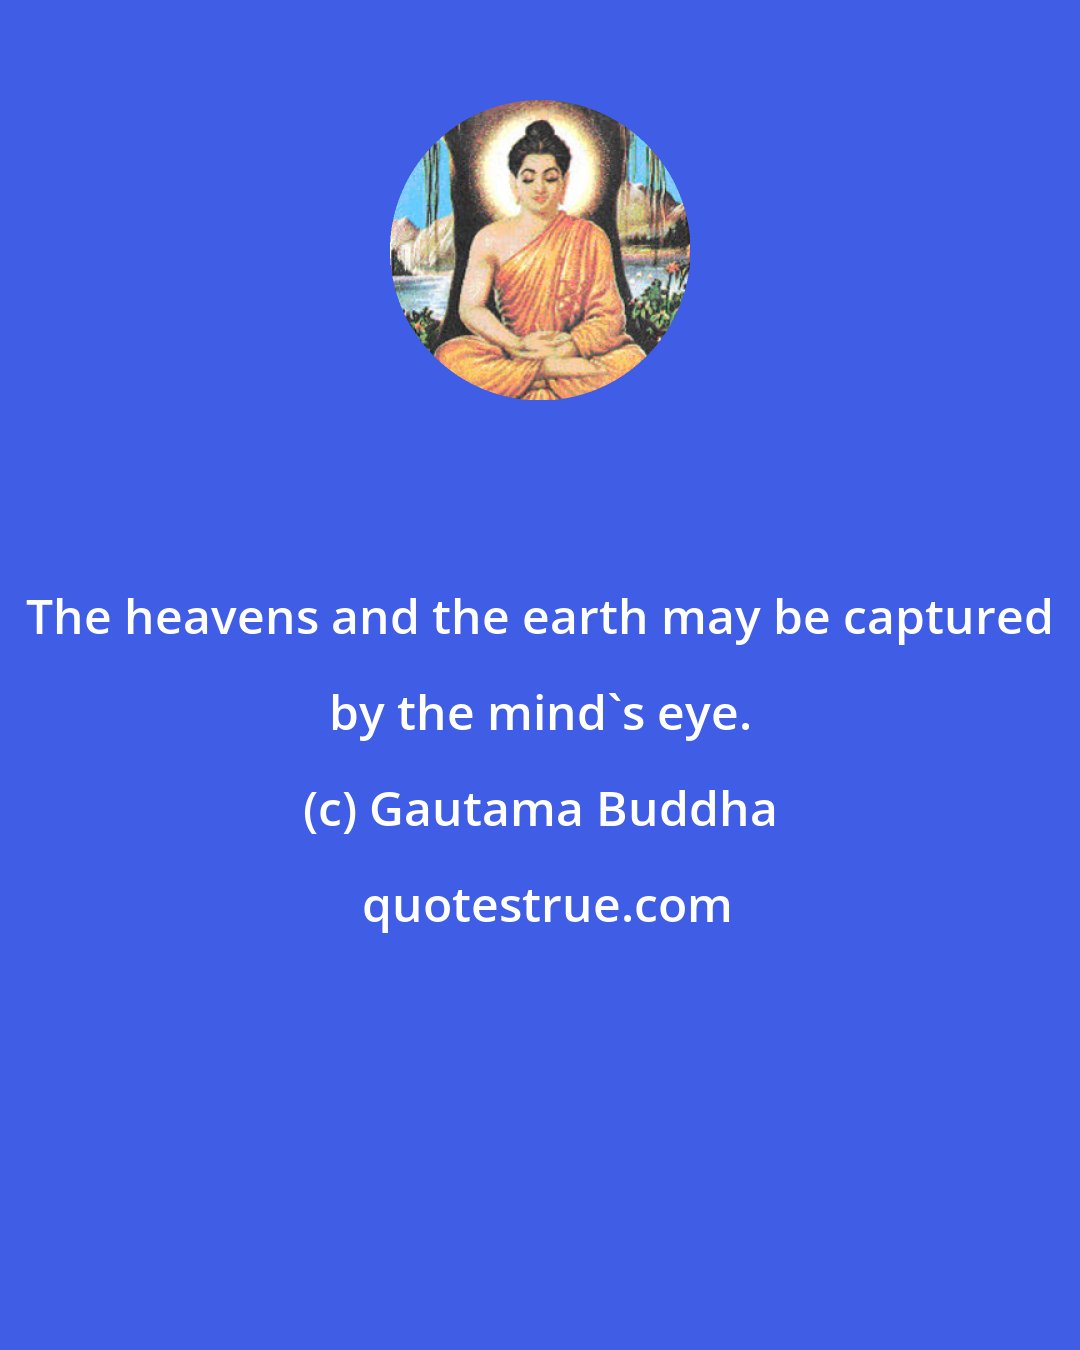 Gautama Buddha: The heavens and the earth may be captured by the mind's eye.